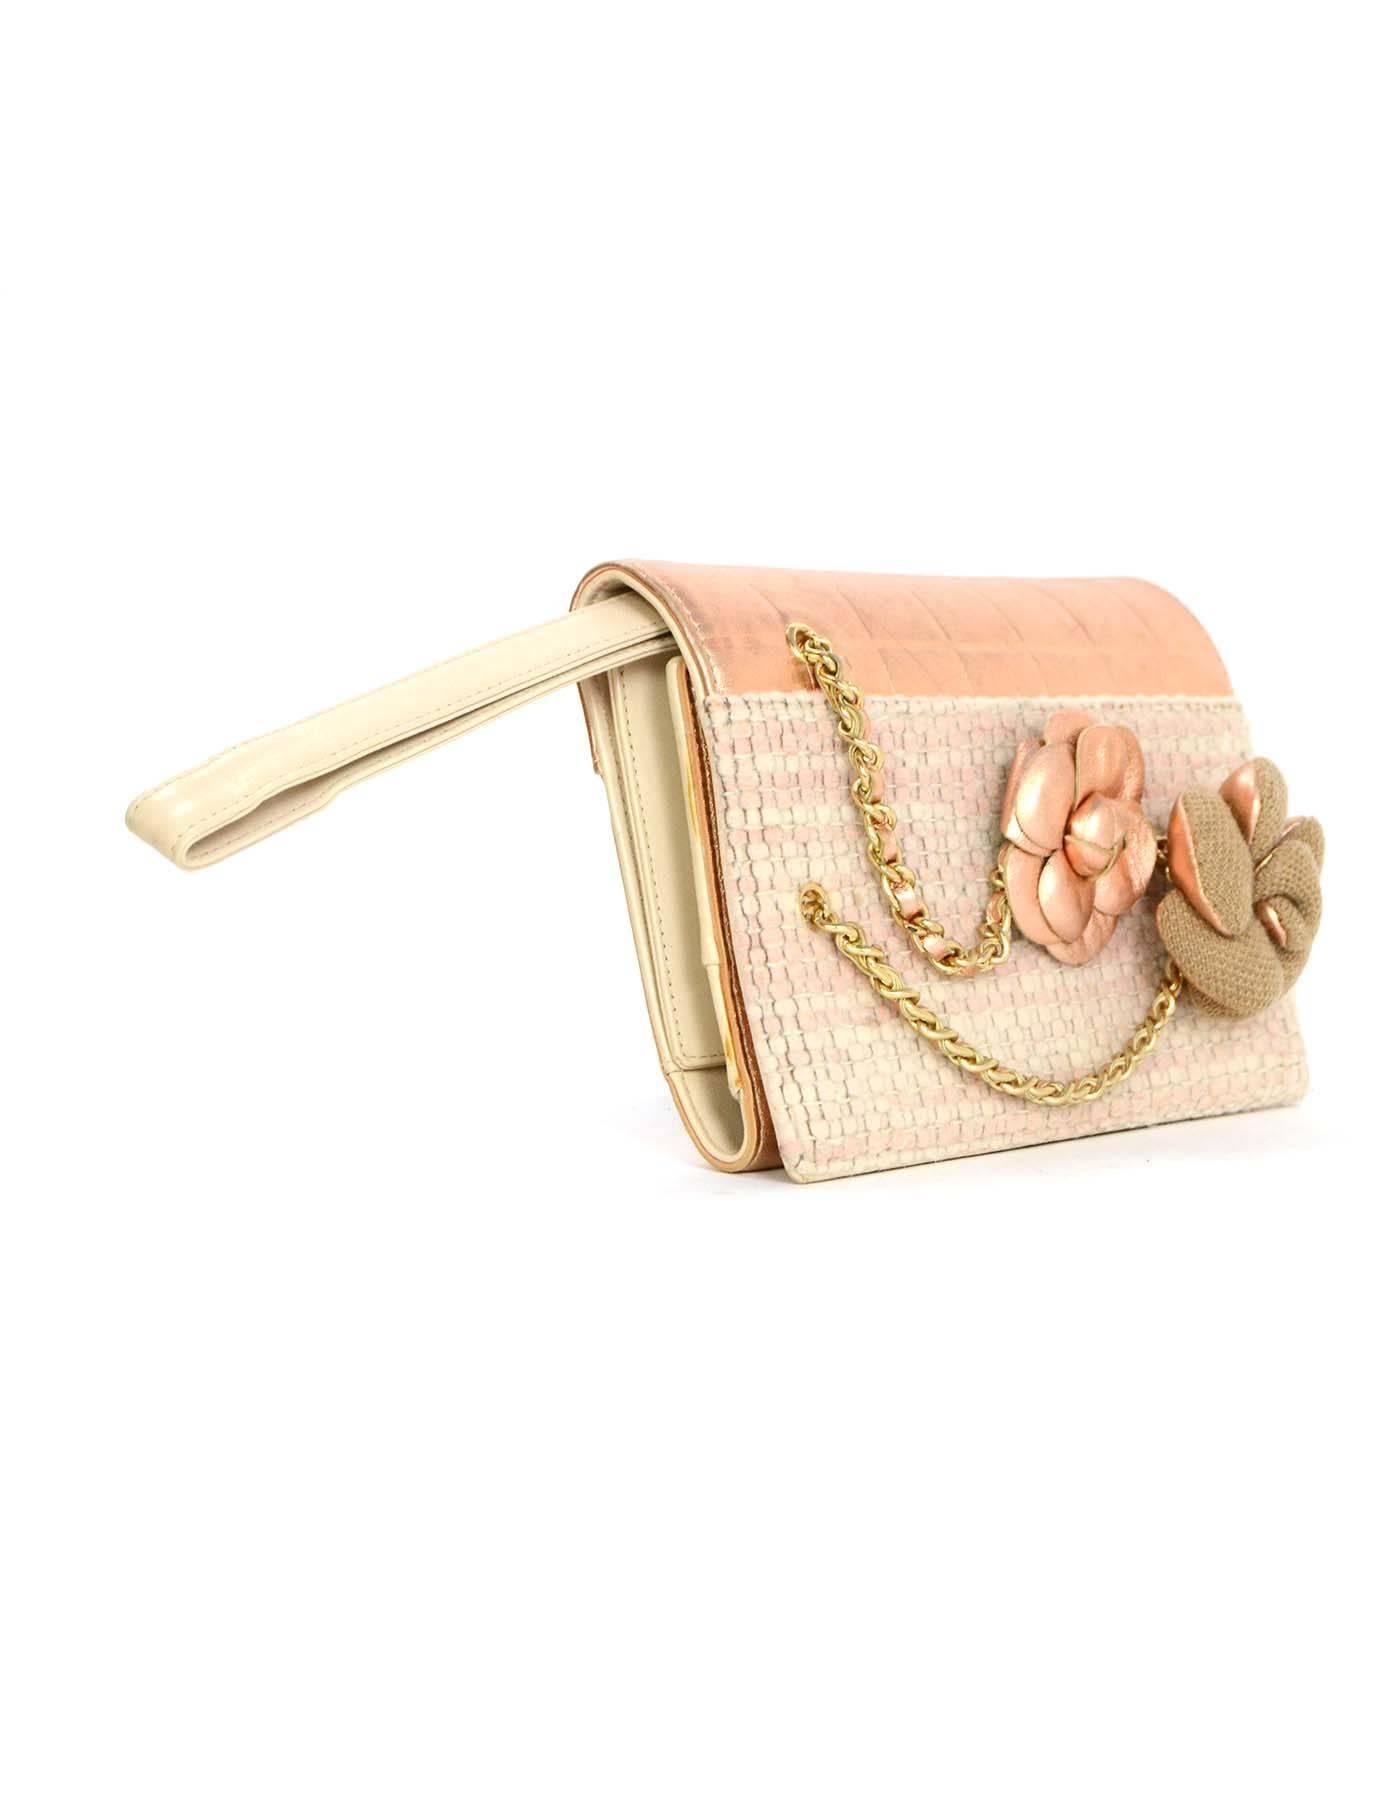 Chanel Metallic Peach Tweed Wristlet Clutch GHW
Features camellia pins with metallic leather trim and gold-tone hardware.  Leather wristlet can be tucked in to be worn as a clutch

Made In: Italy
Year of Production: 2001
Color: Metallic peach